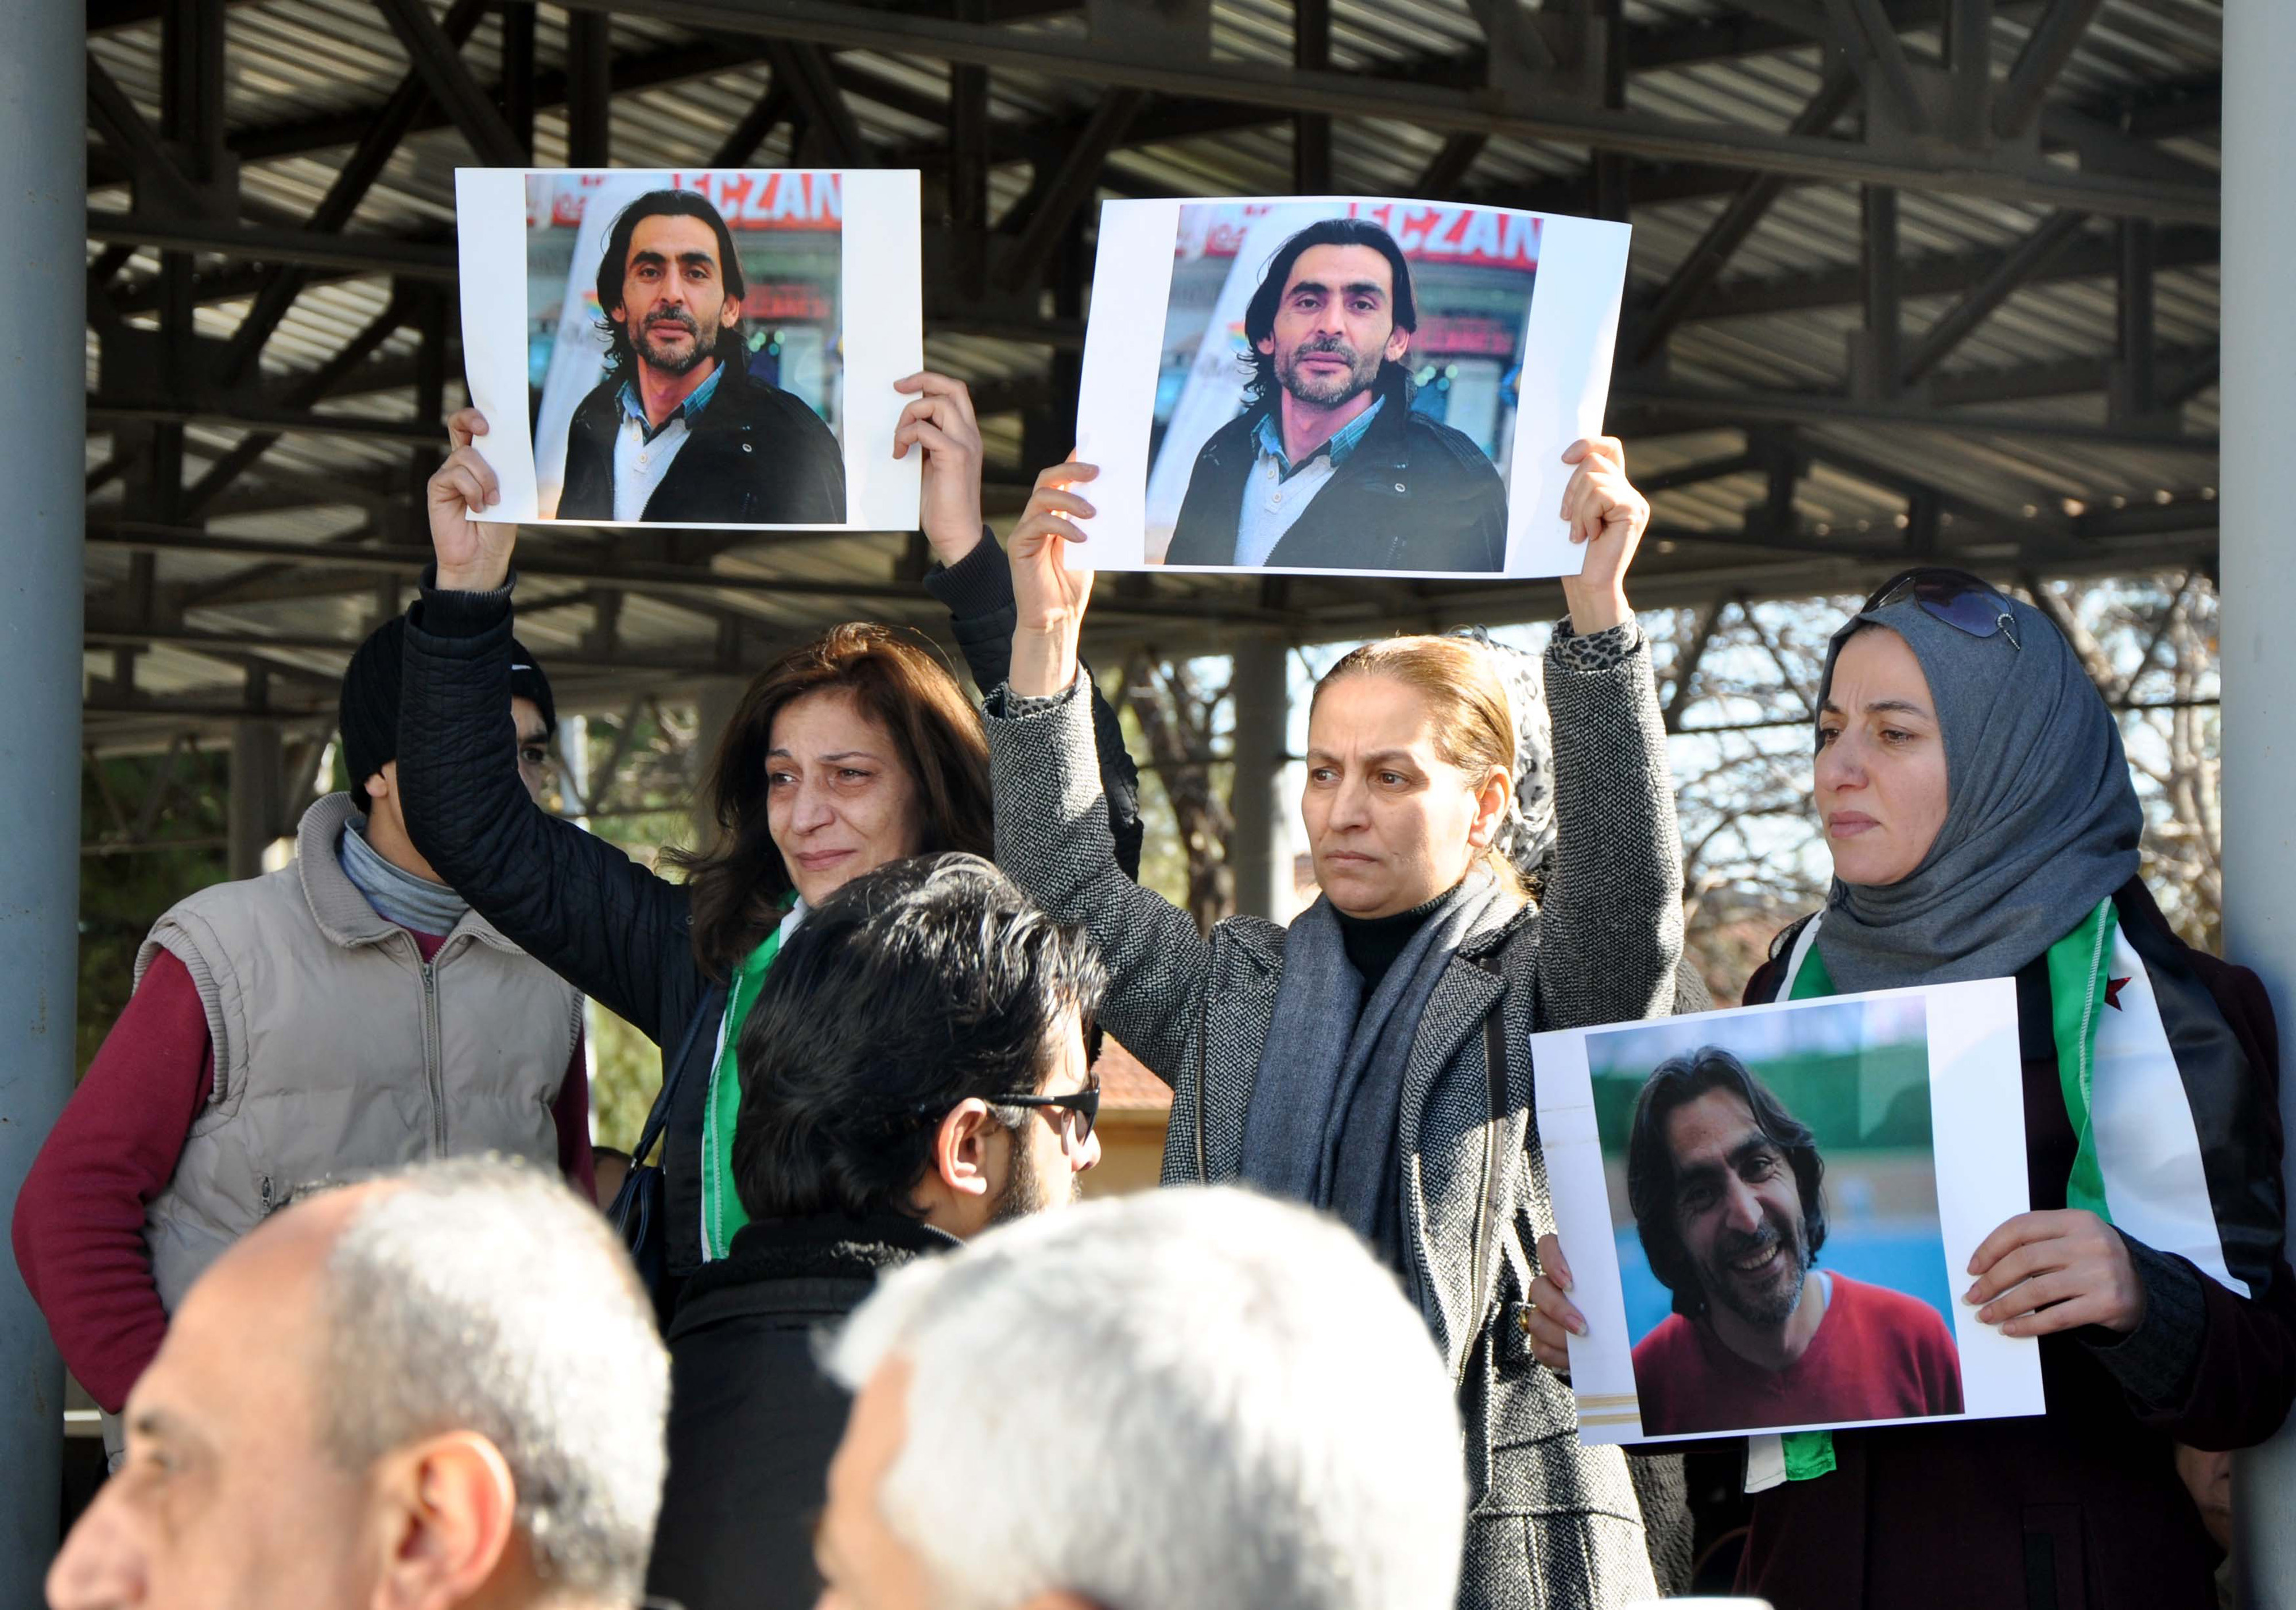 Women hold pictures of film maker Naji Jerf, who was killed on December 27, during his funeral in Gaziantep on Dec. 28, 2015.